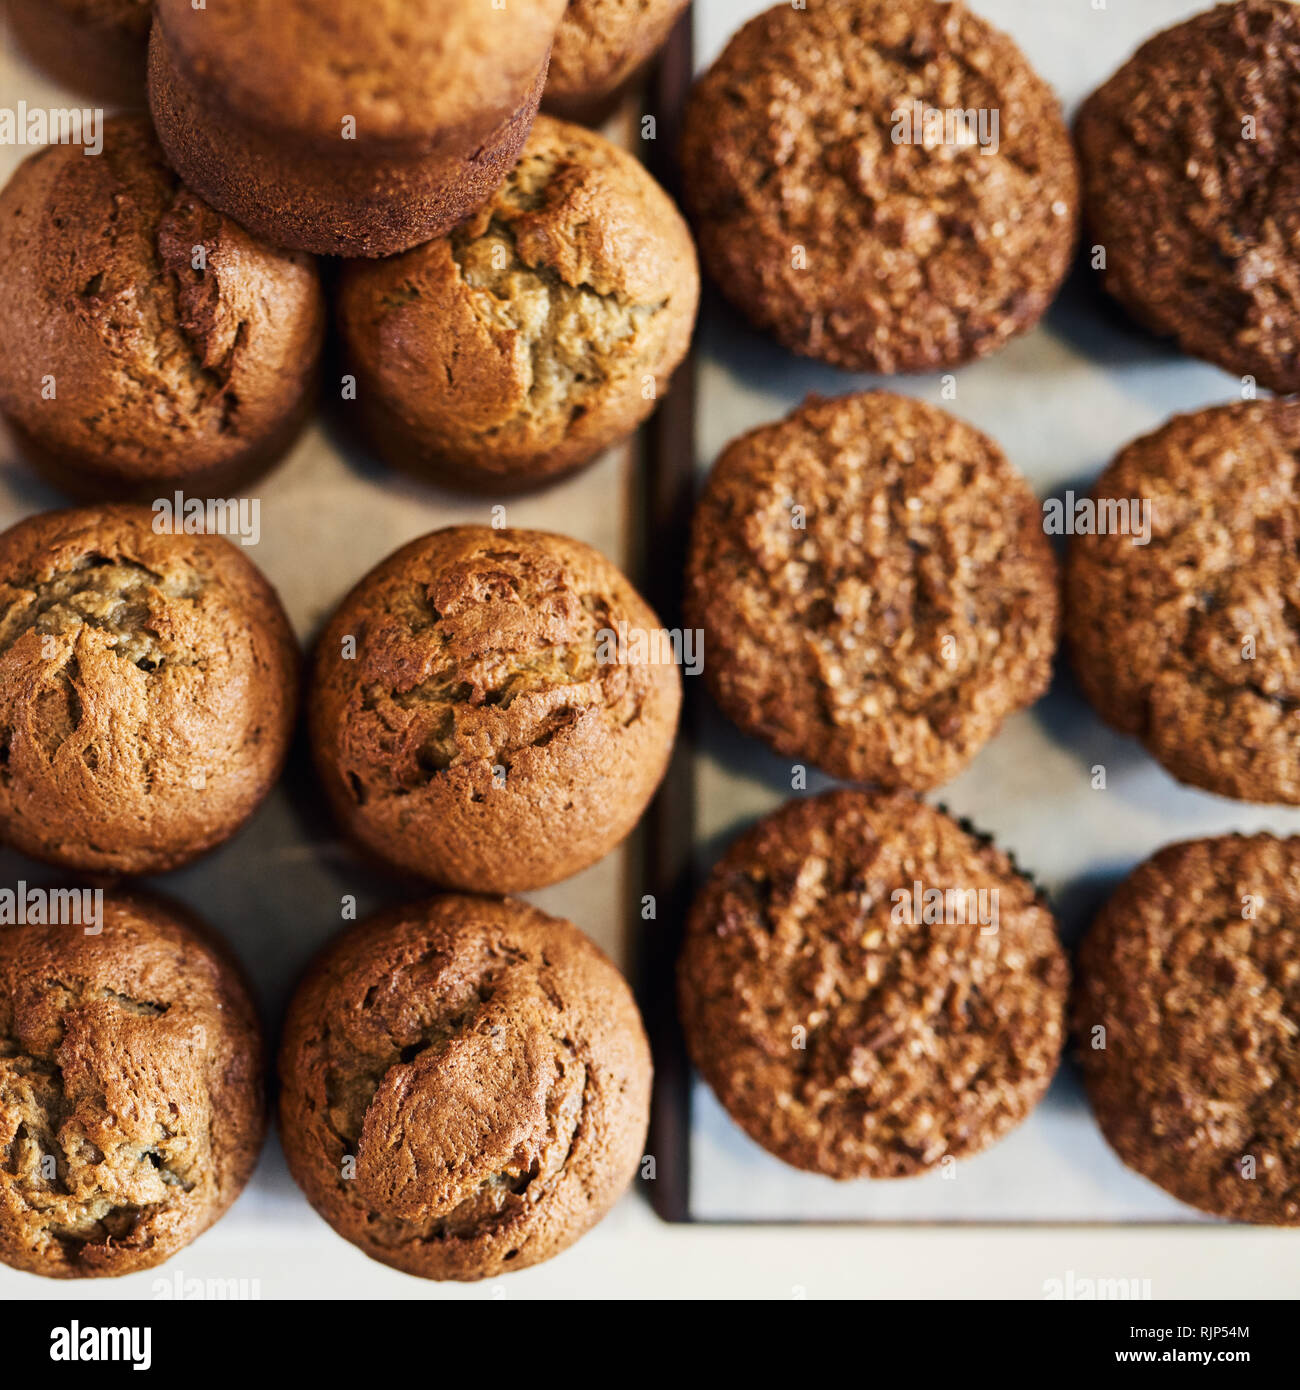 Delicious assortment of muffins sitting on cafe serving boards Stock Photo